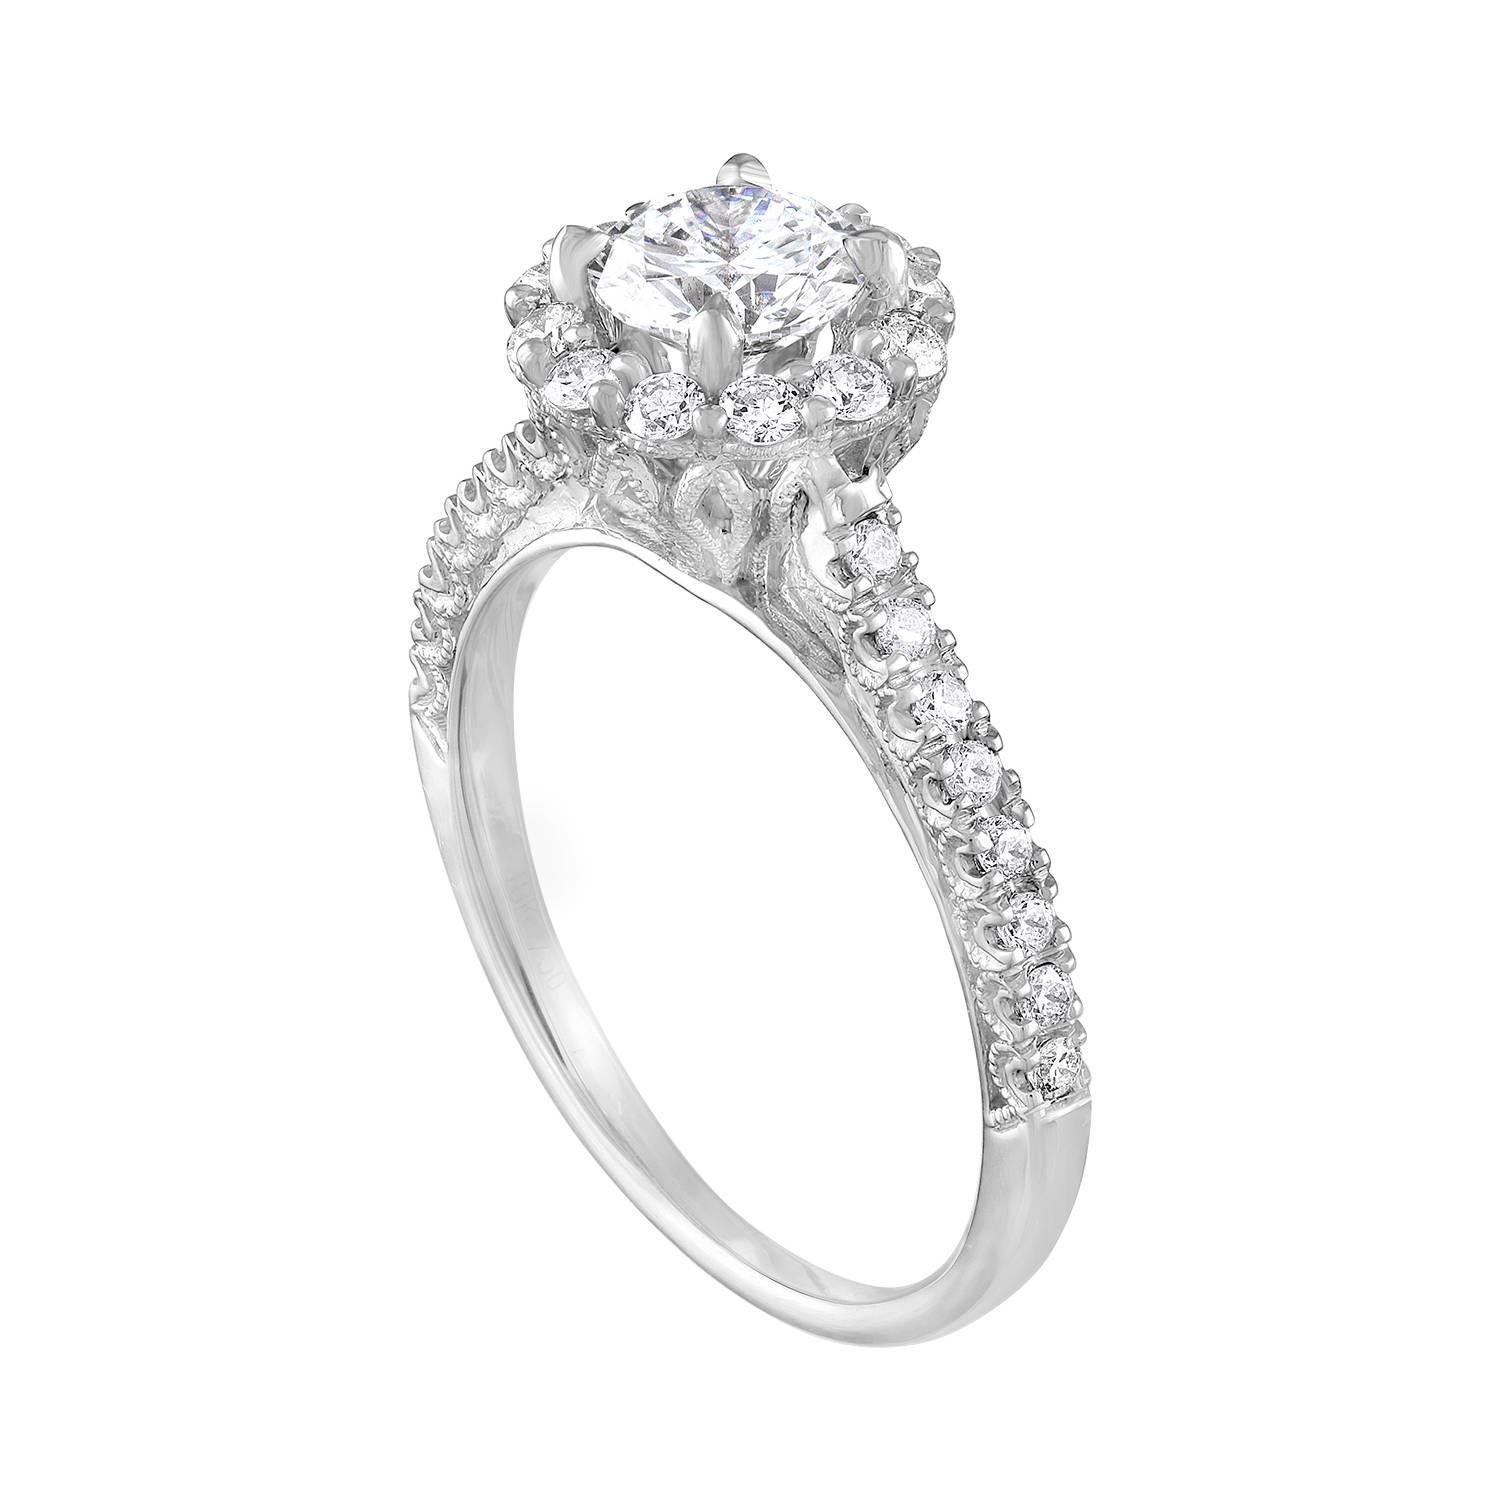 The ring is 18K White Gold, Milgrain Design.
The center stone is a Round 0.80 Carats E VVS1 GIA Certified.
The setting has 0.45 Carats in White Diamonds G/H SI.
The ring is a size 7.25, sizable.
The ring weighs 3.9 grams.